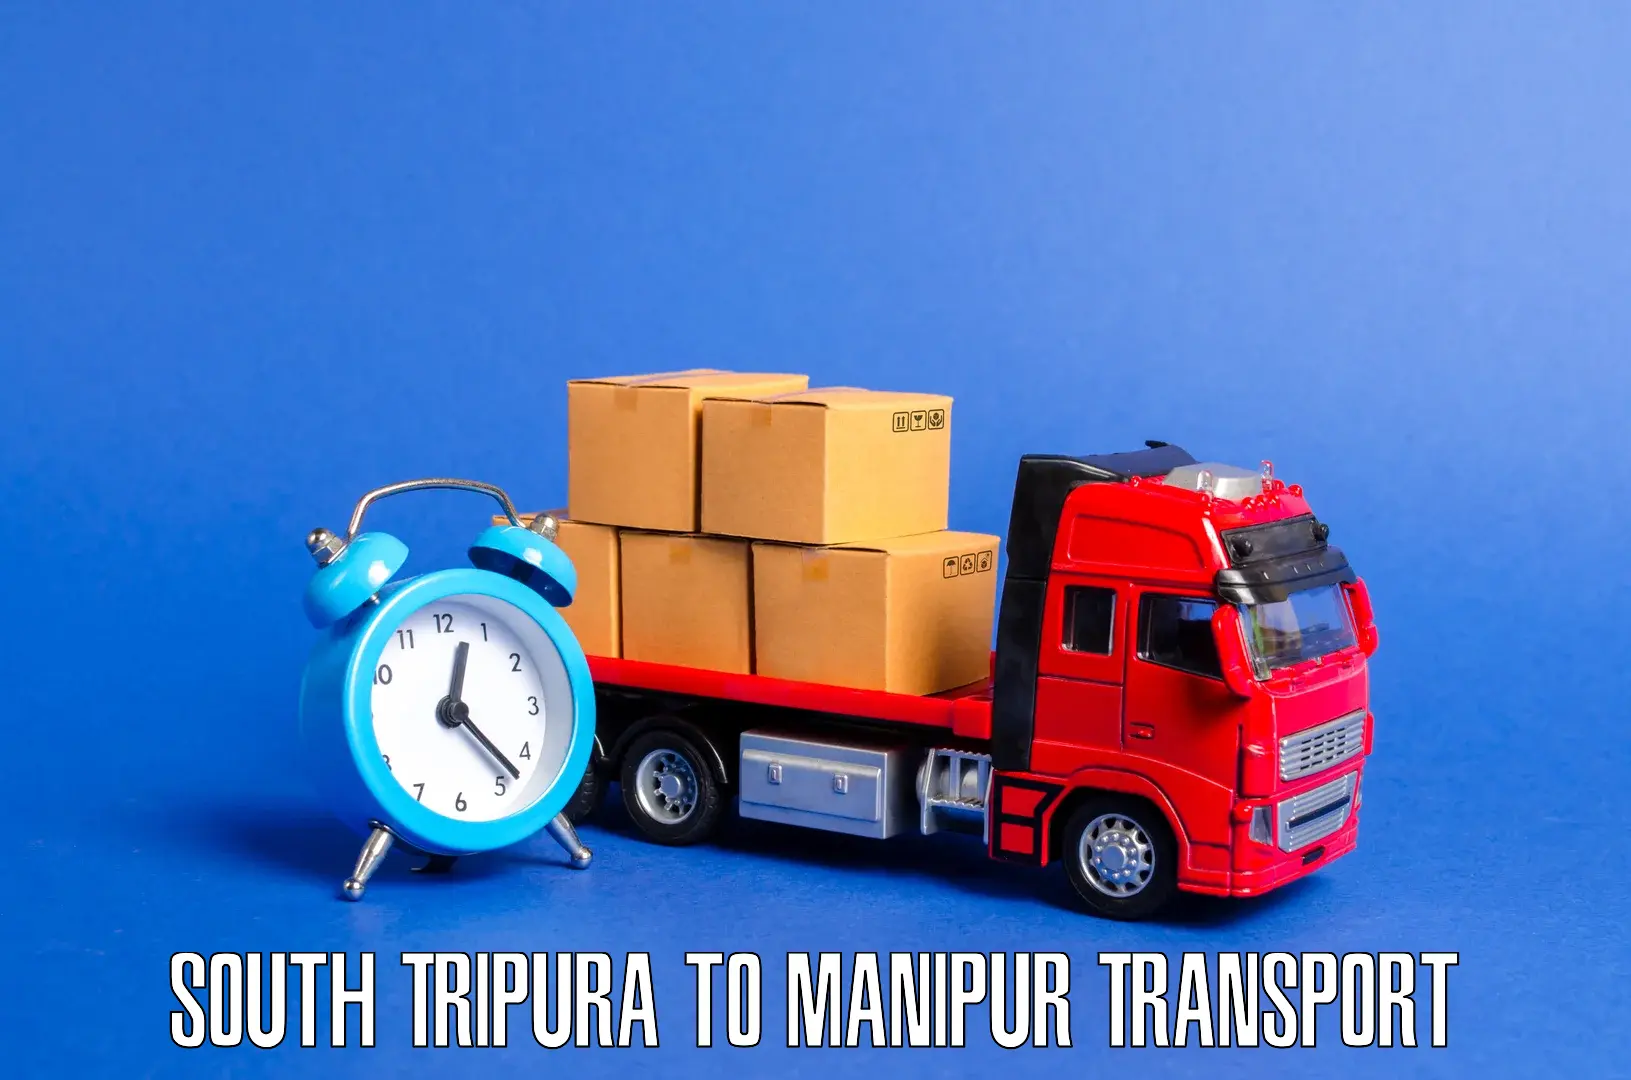 Daily parcel service transport South Tripura to Moirang